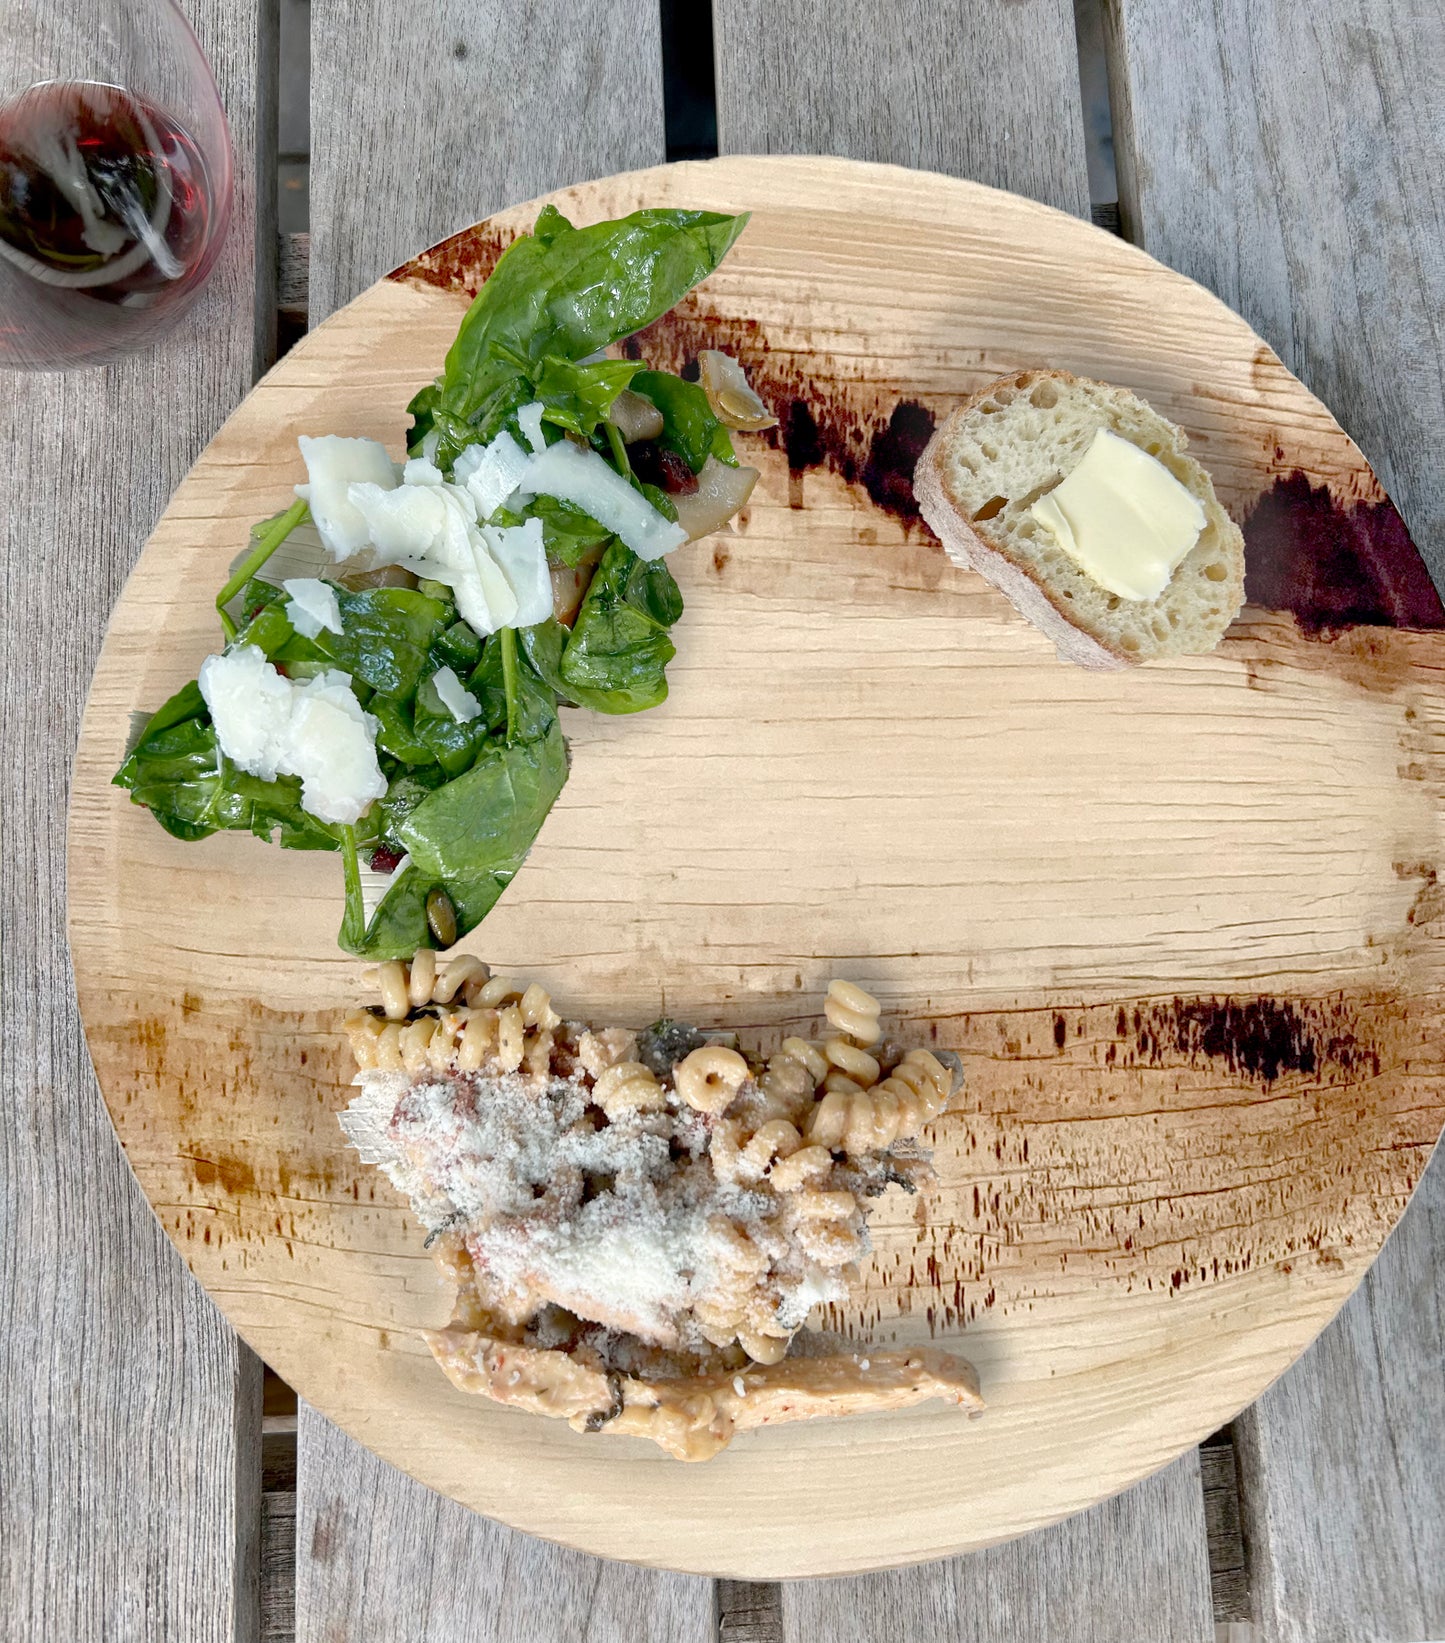 NEATtable compostable palm leaf plate being used for an outdoor dinner